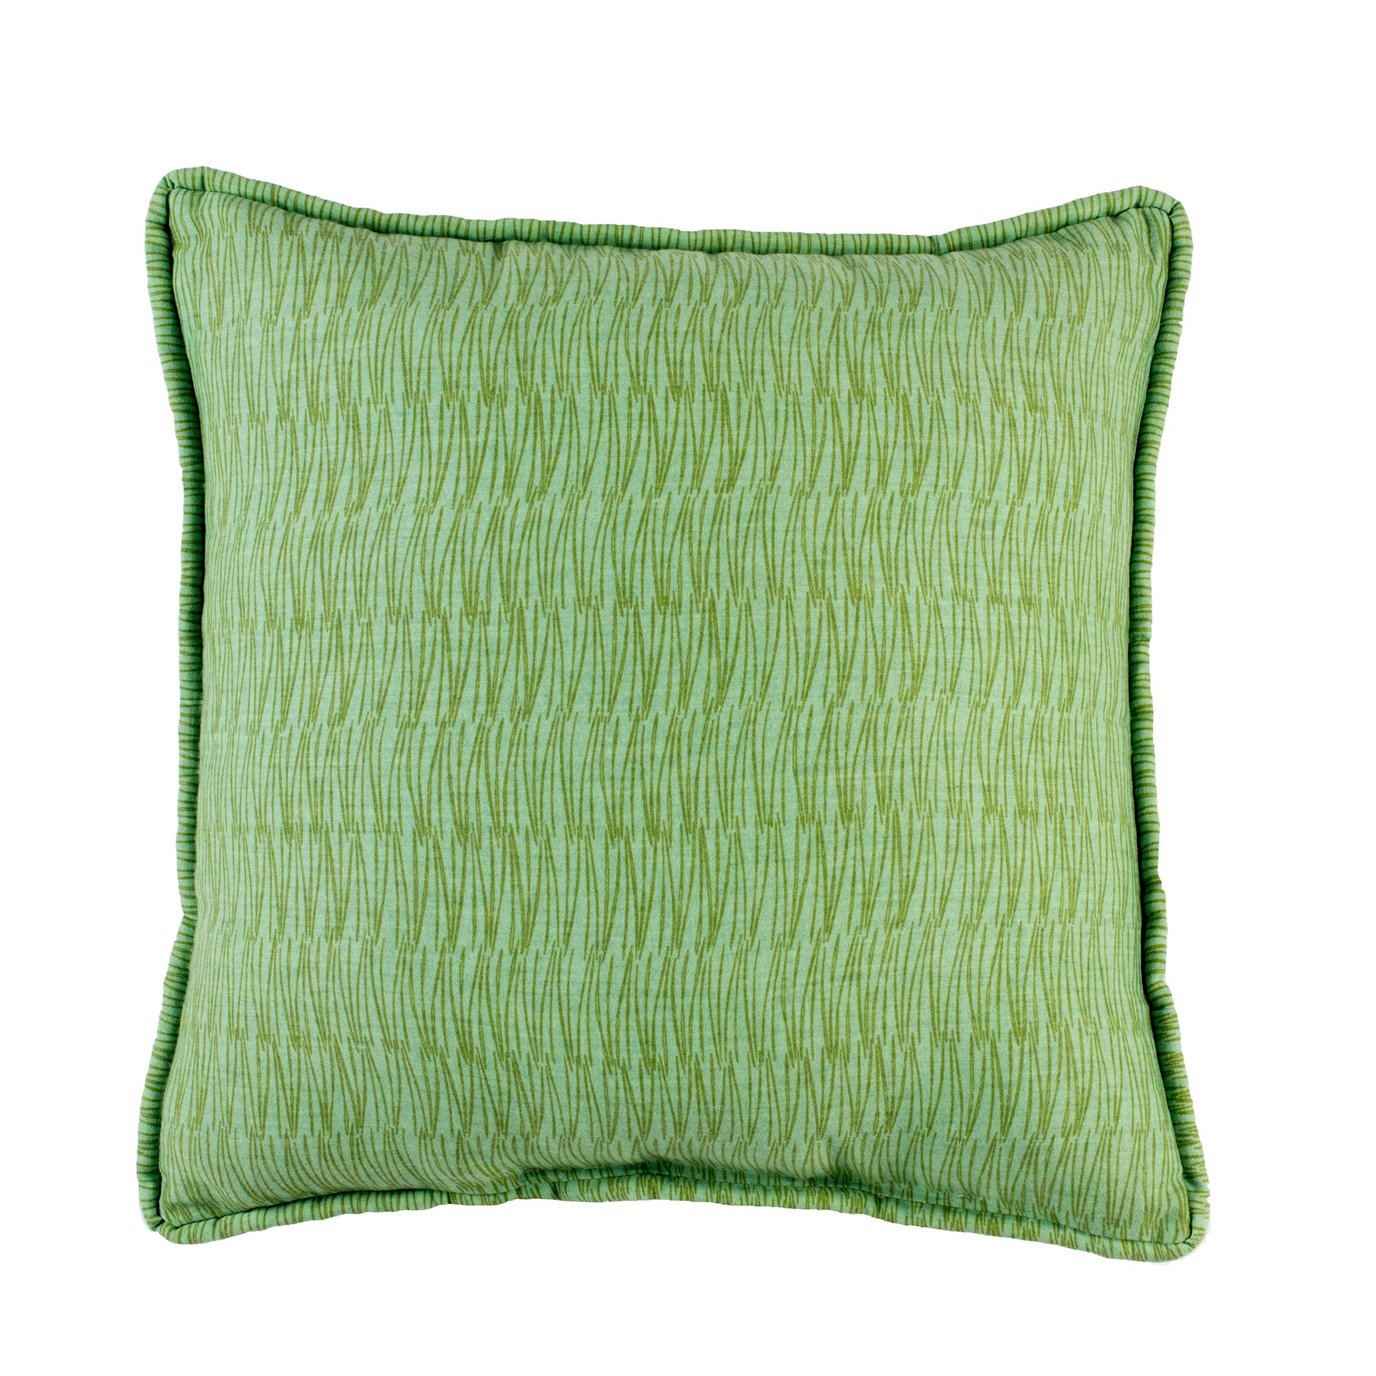 Serenity Square Pillow - Green Grass